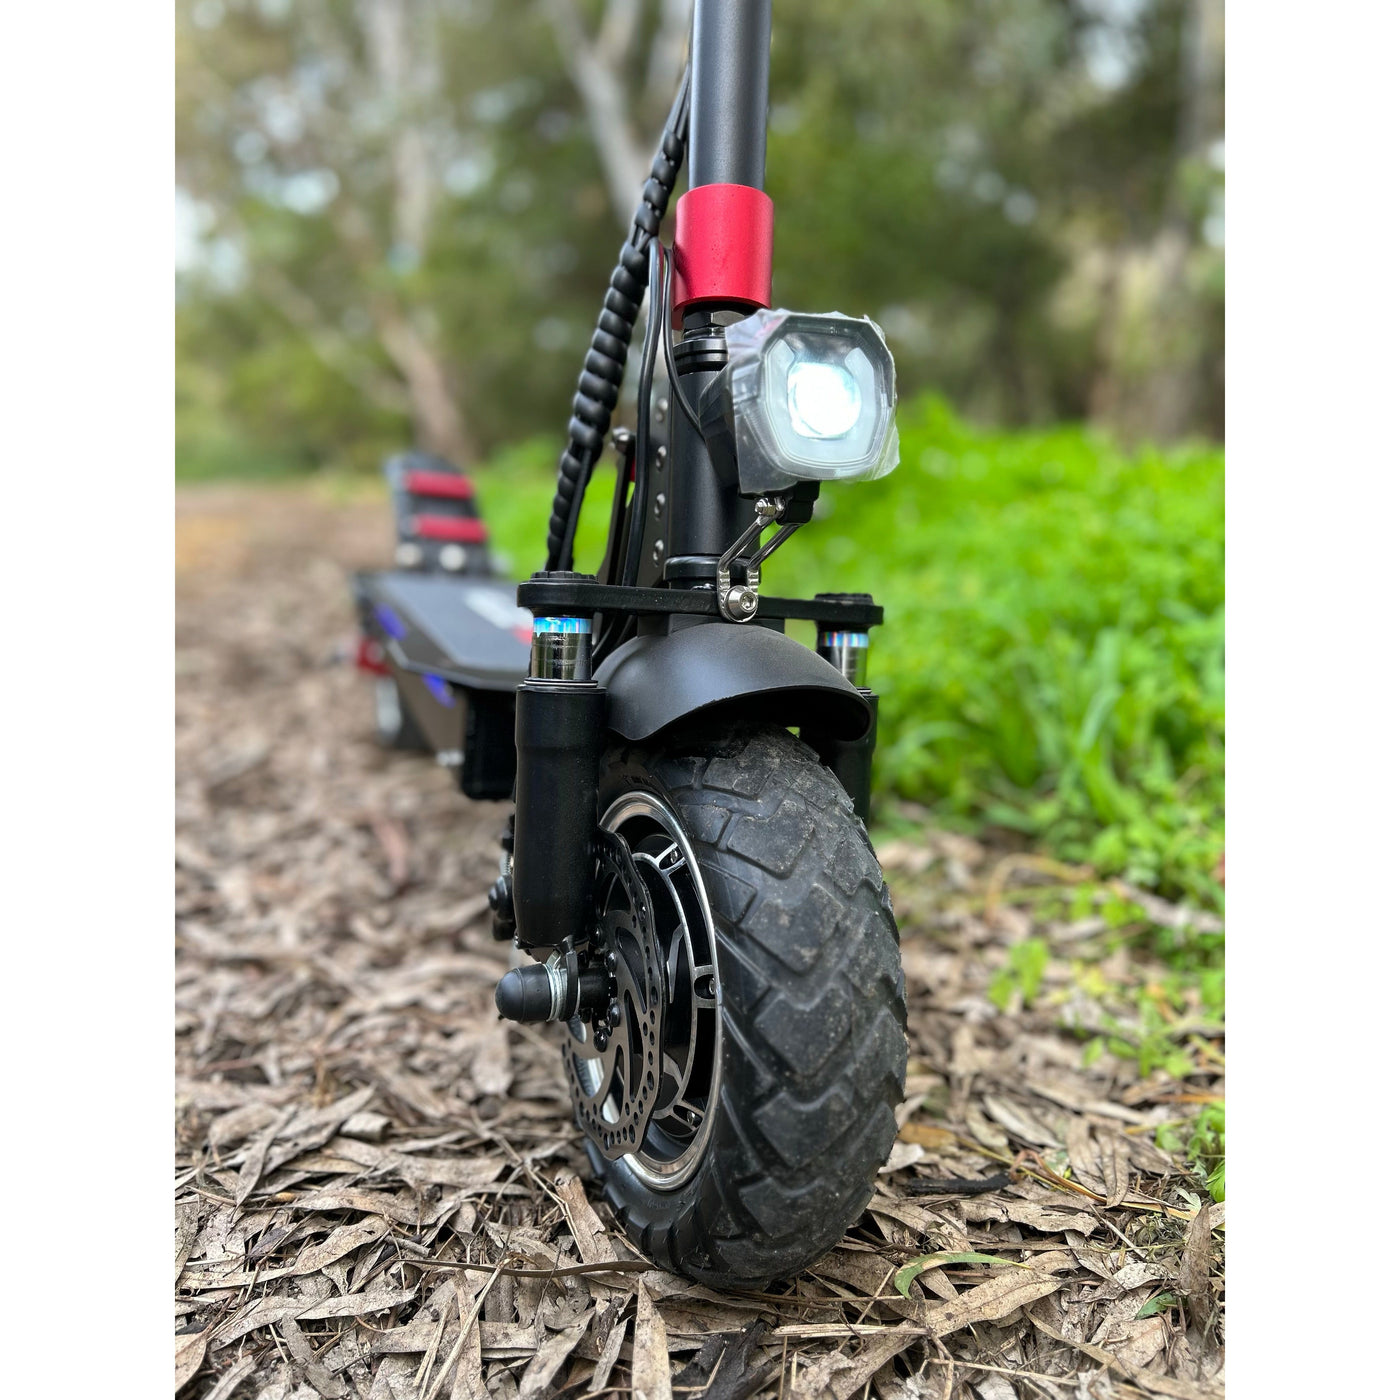 ELECTRIC SCOOTER VELOZ V2 DUAL MOTOR 2400W WITH KEYLOCK SYSTEM ALL TERRAIN 6 MONTHS FREE SERVICE Model 2022 - EOzzie Electric Vehicles